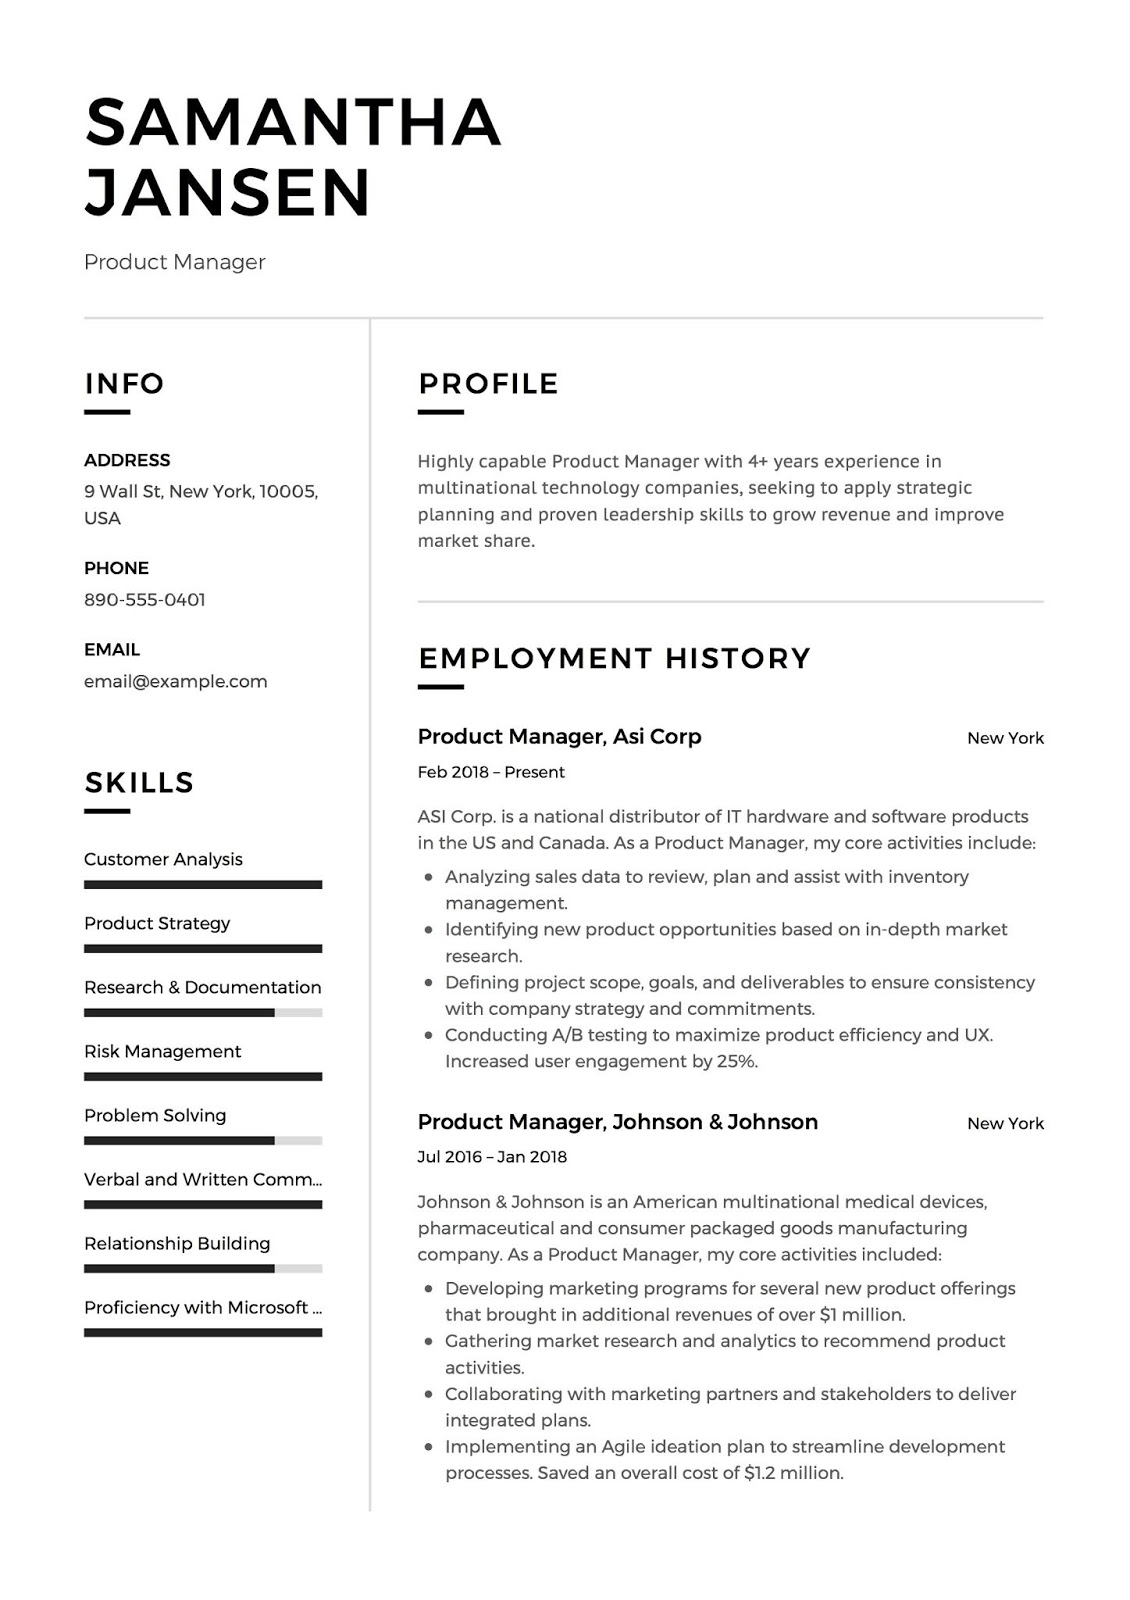 Benefits Manager Resume Summary 2019 Resume Cover Letter 2020 benefits manager resume benefits manager resume summary benefits manager resume cover letter benefits manager resume template benefits account manager resume employee benefits manager resume sample 